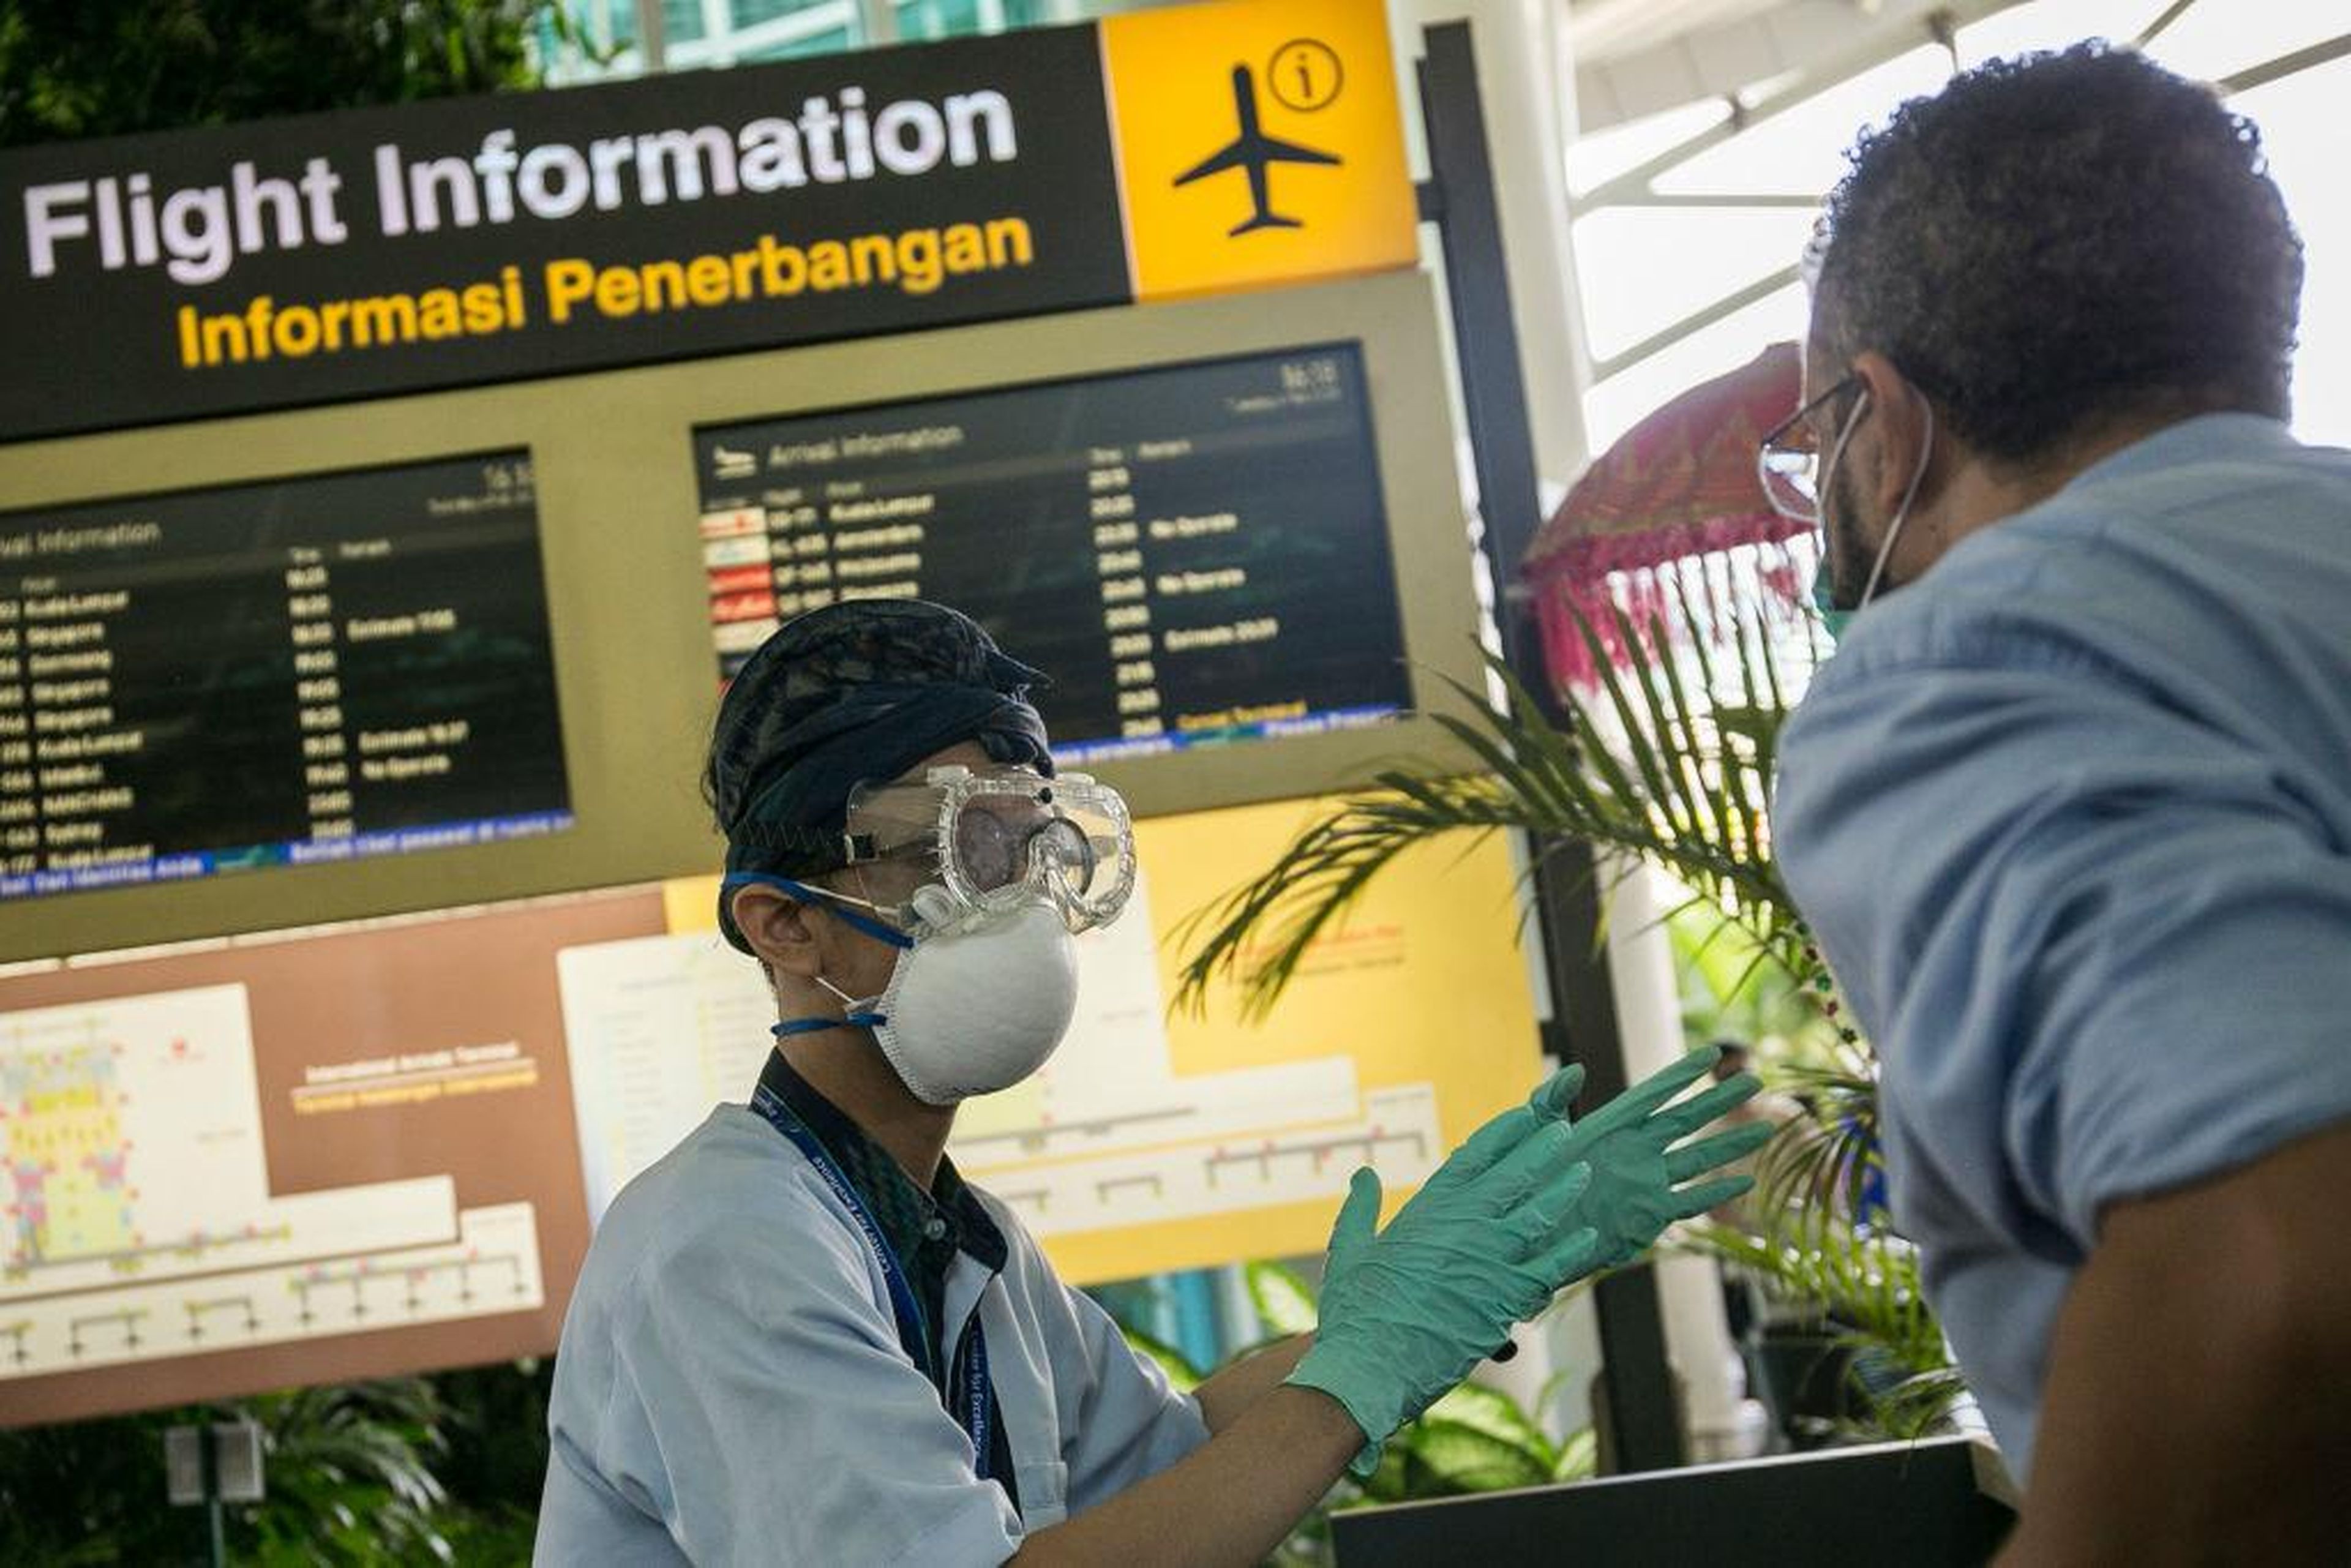 Information officer wearing protective mask, gloves and goggle, as prevention of novel coronavirus epidemic, gives directions to a passenger at international arrival gate of Bali Ngurah Rai International Airport in Kuta, Bali, Indonesia on February 4 2020